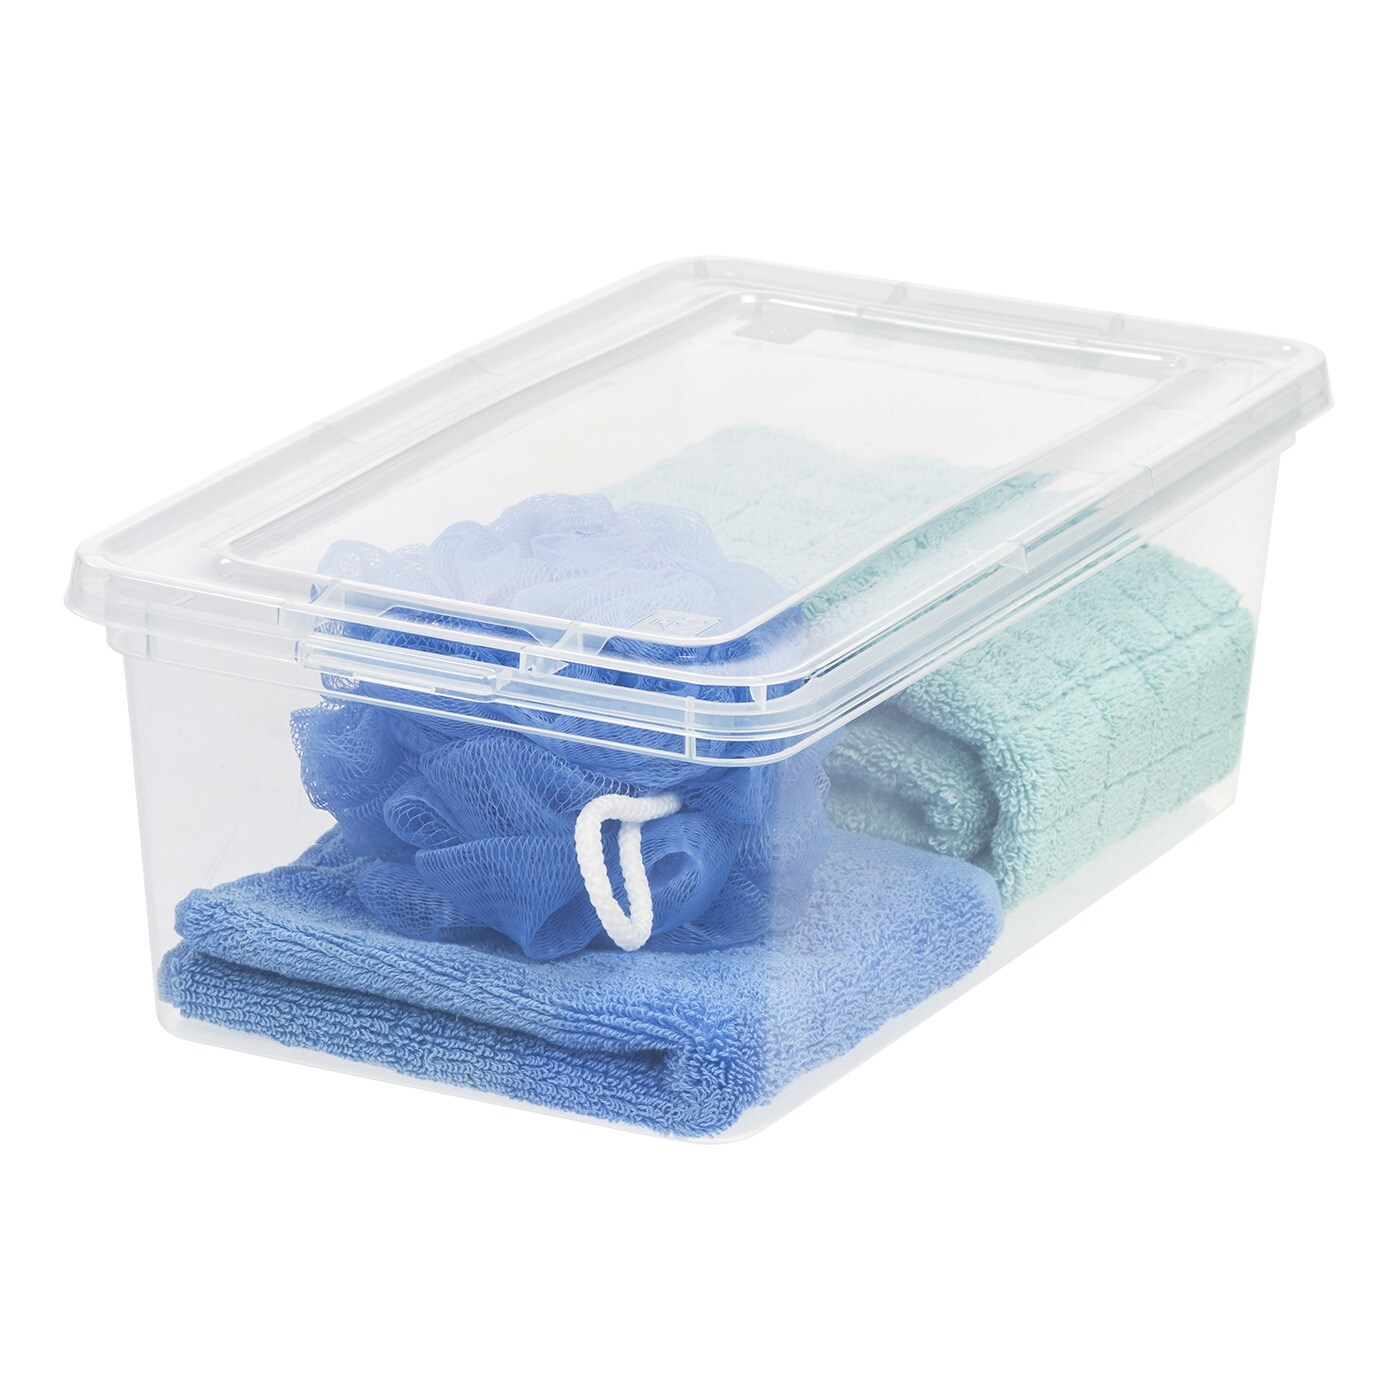 20 Liter Plastic Storage Box with Snap Lid by Top Notch - Plastic Storage - Storage & Organization